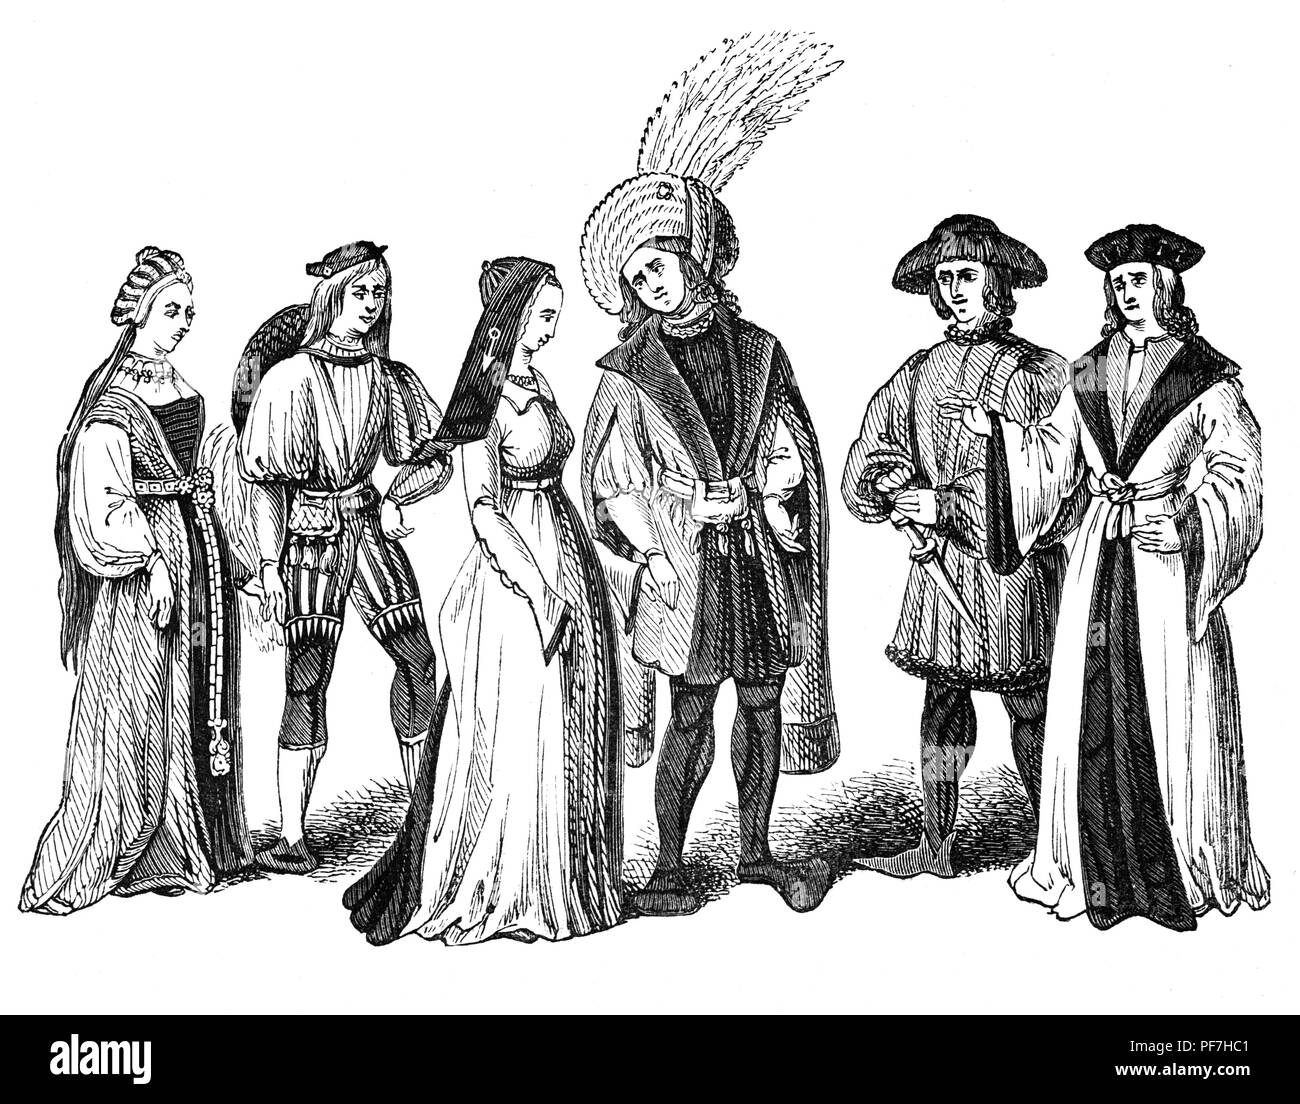 Fashions for men and women during the reign of Henry VII. He used dress to bolster his claim to the throne and project a status in the days after the Battle of Bosworth. Tudor clothing continued to evolve as fashions and trends changed. Tudor gowns were designed to give women a triangular shape, while men’s clothes gave them an almost square shape. At court, women’s gowns usually consisted of a smock, petticoat, kirtle, and a partlet. Men, meanwhile, wore a shirt, jerkin, doublet, overgown, and a hose. Men also usually wore caps, adorned with various jewels and feathers. Stock Photo